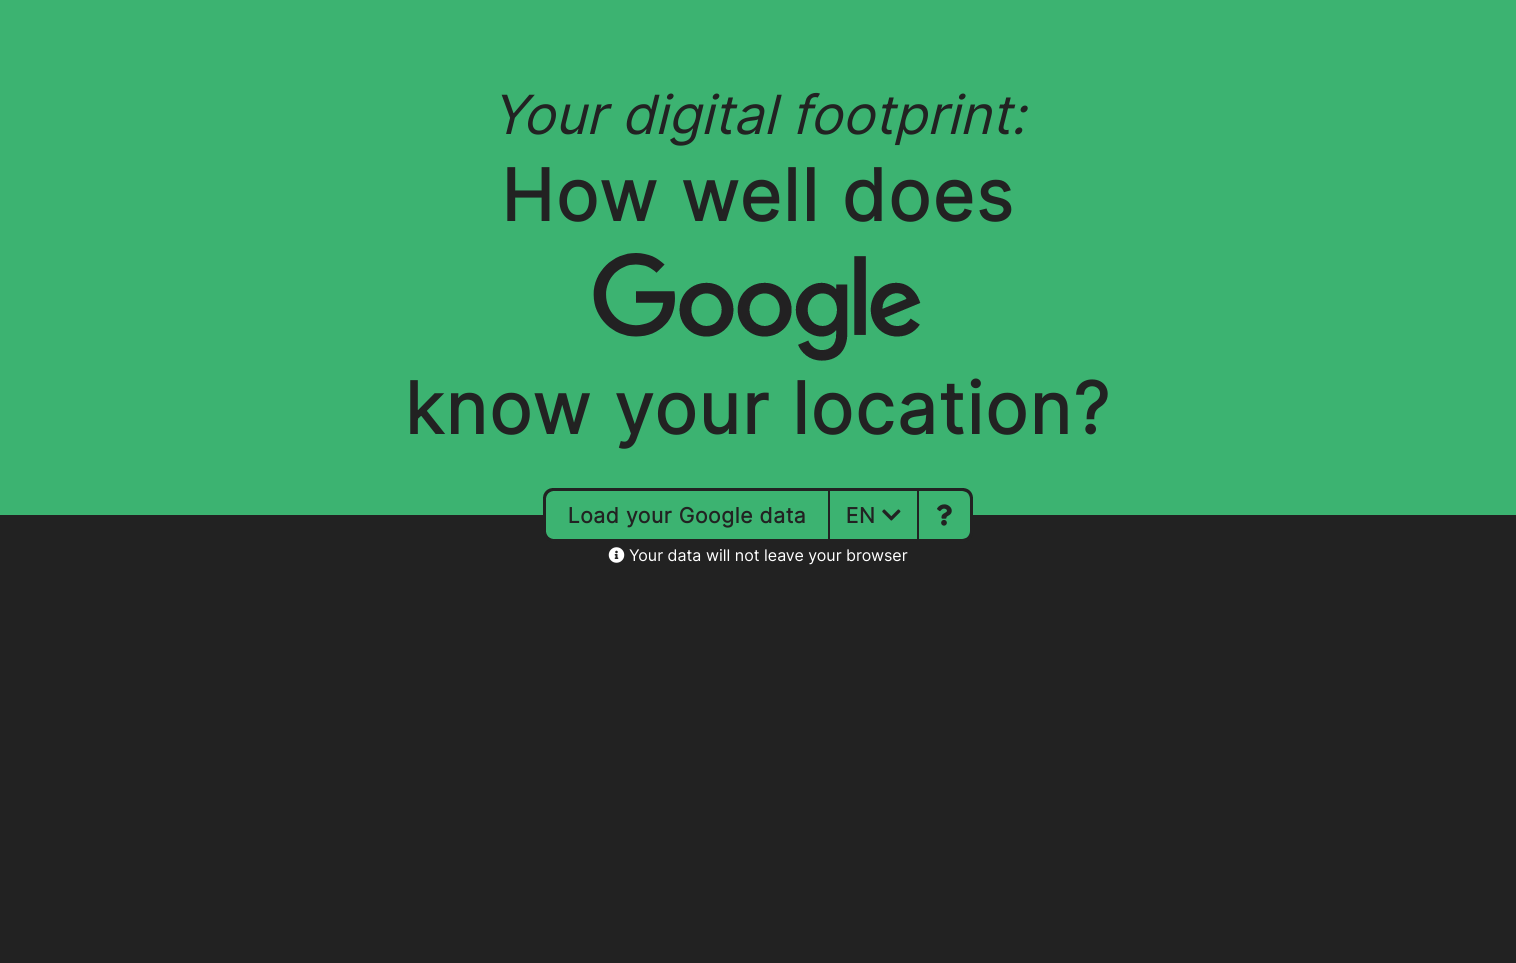 A screenshot of footprint.cza.li. The text says: 'Your digital footprint: How well does Google know your location?'. There is a 'Load your Google data' button, a language selector and a question mark button beneath. Below those, there is a 'Your data will not leave your browser' info text. The top half of the page and the buttons, which float in the middle, are black-on-green, the lower half is white-on-dark-grey.